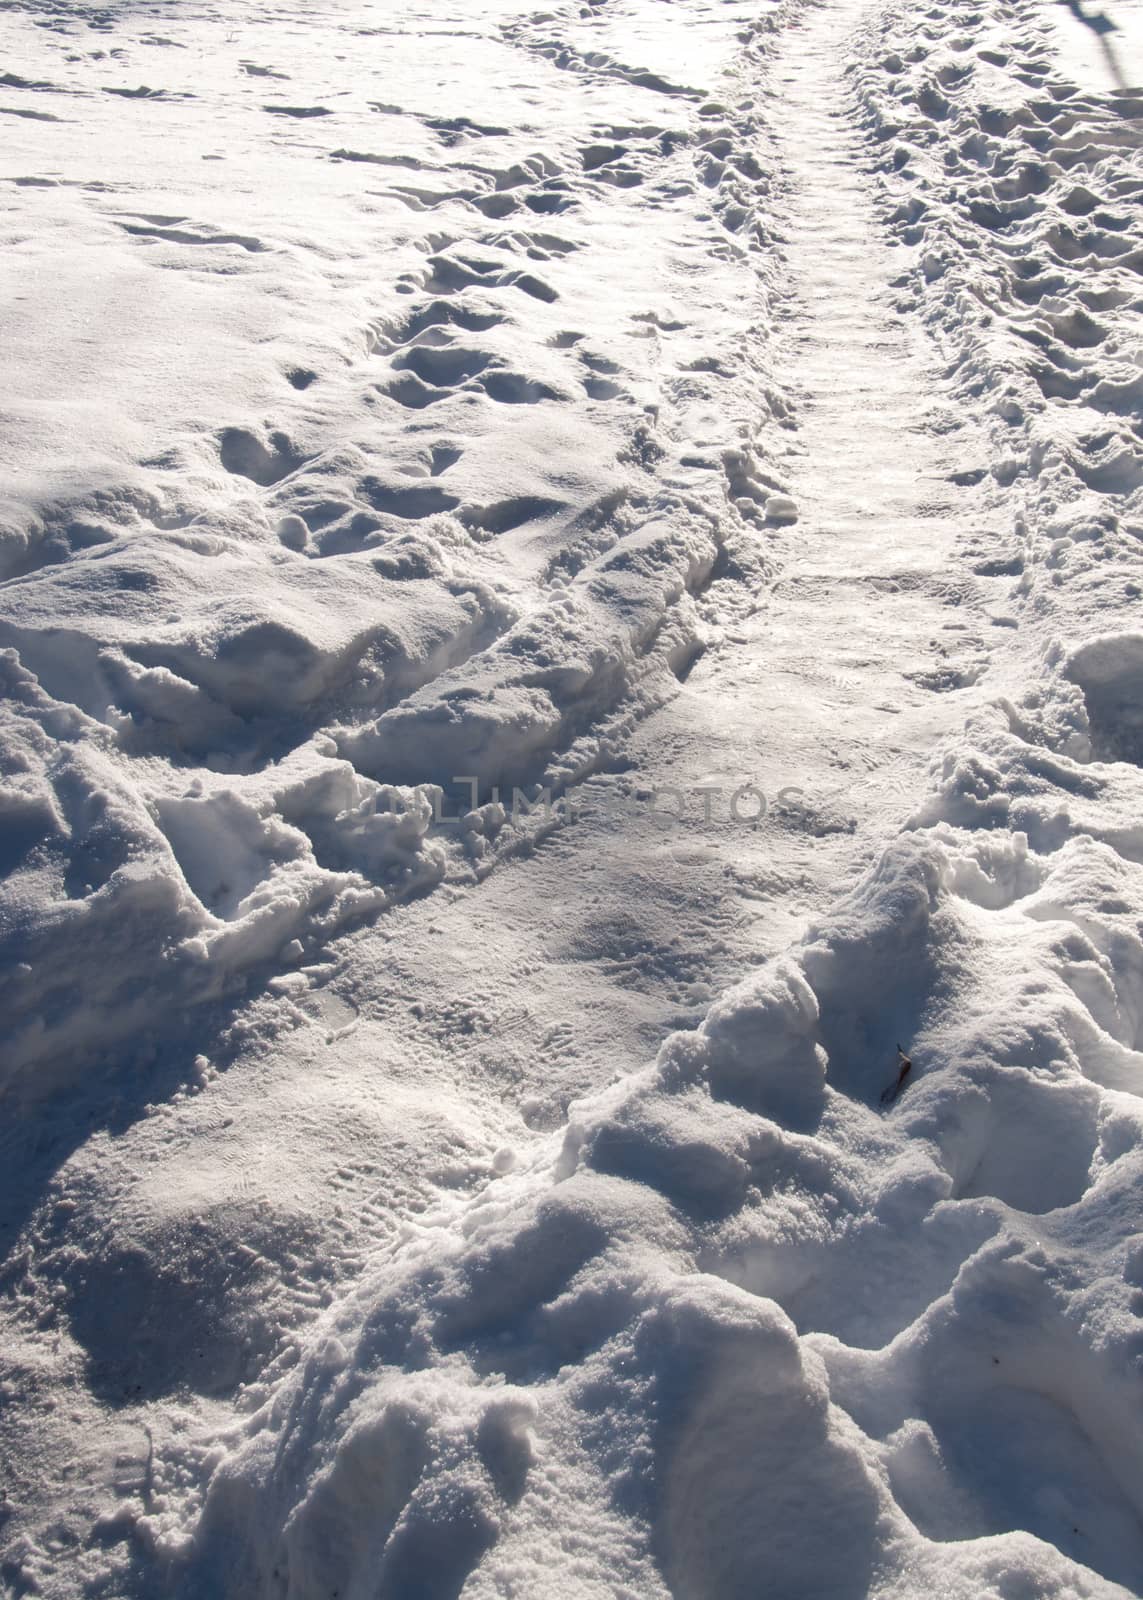 Sunny snowy winter path in an s-curve shape, vertical image.